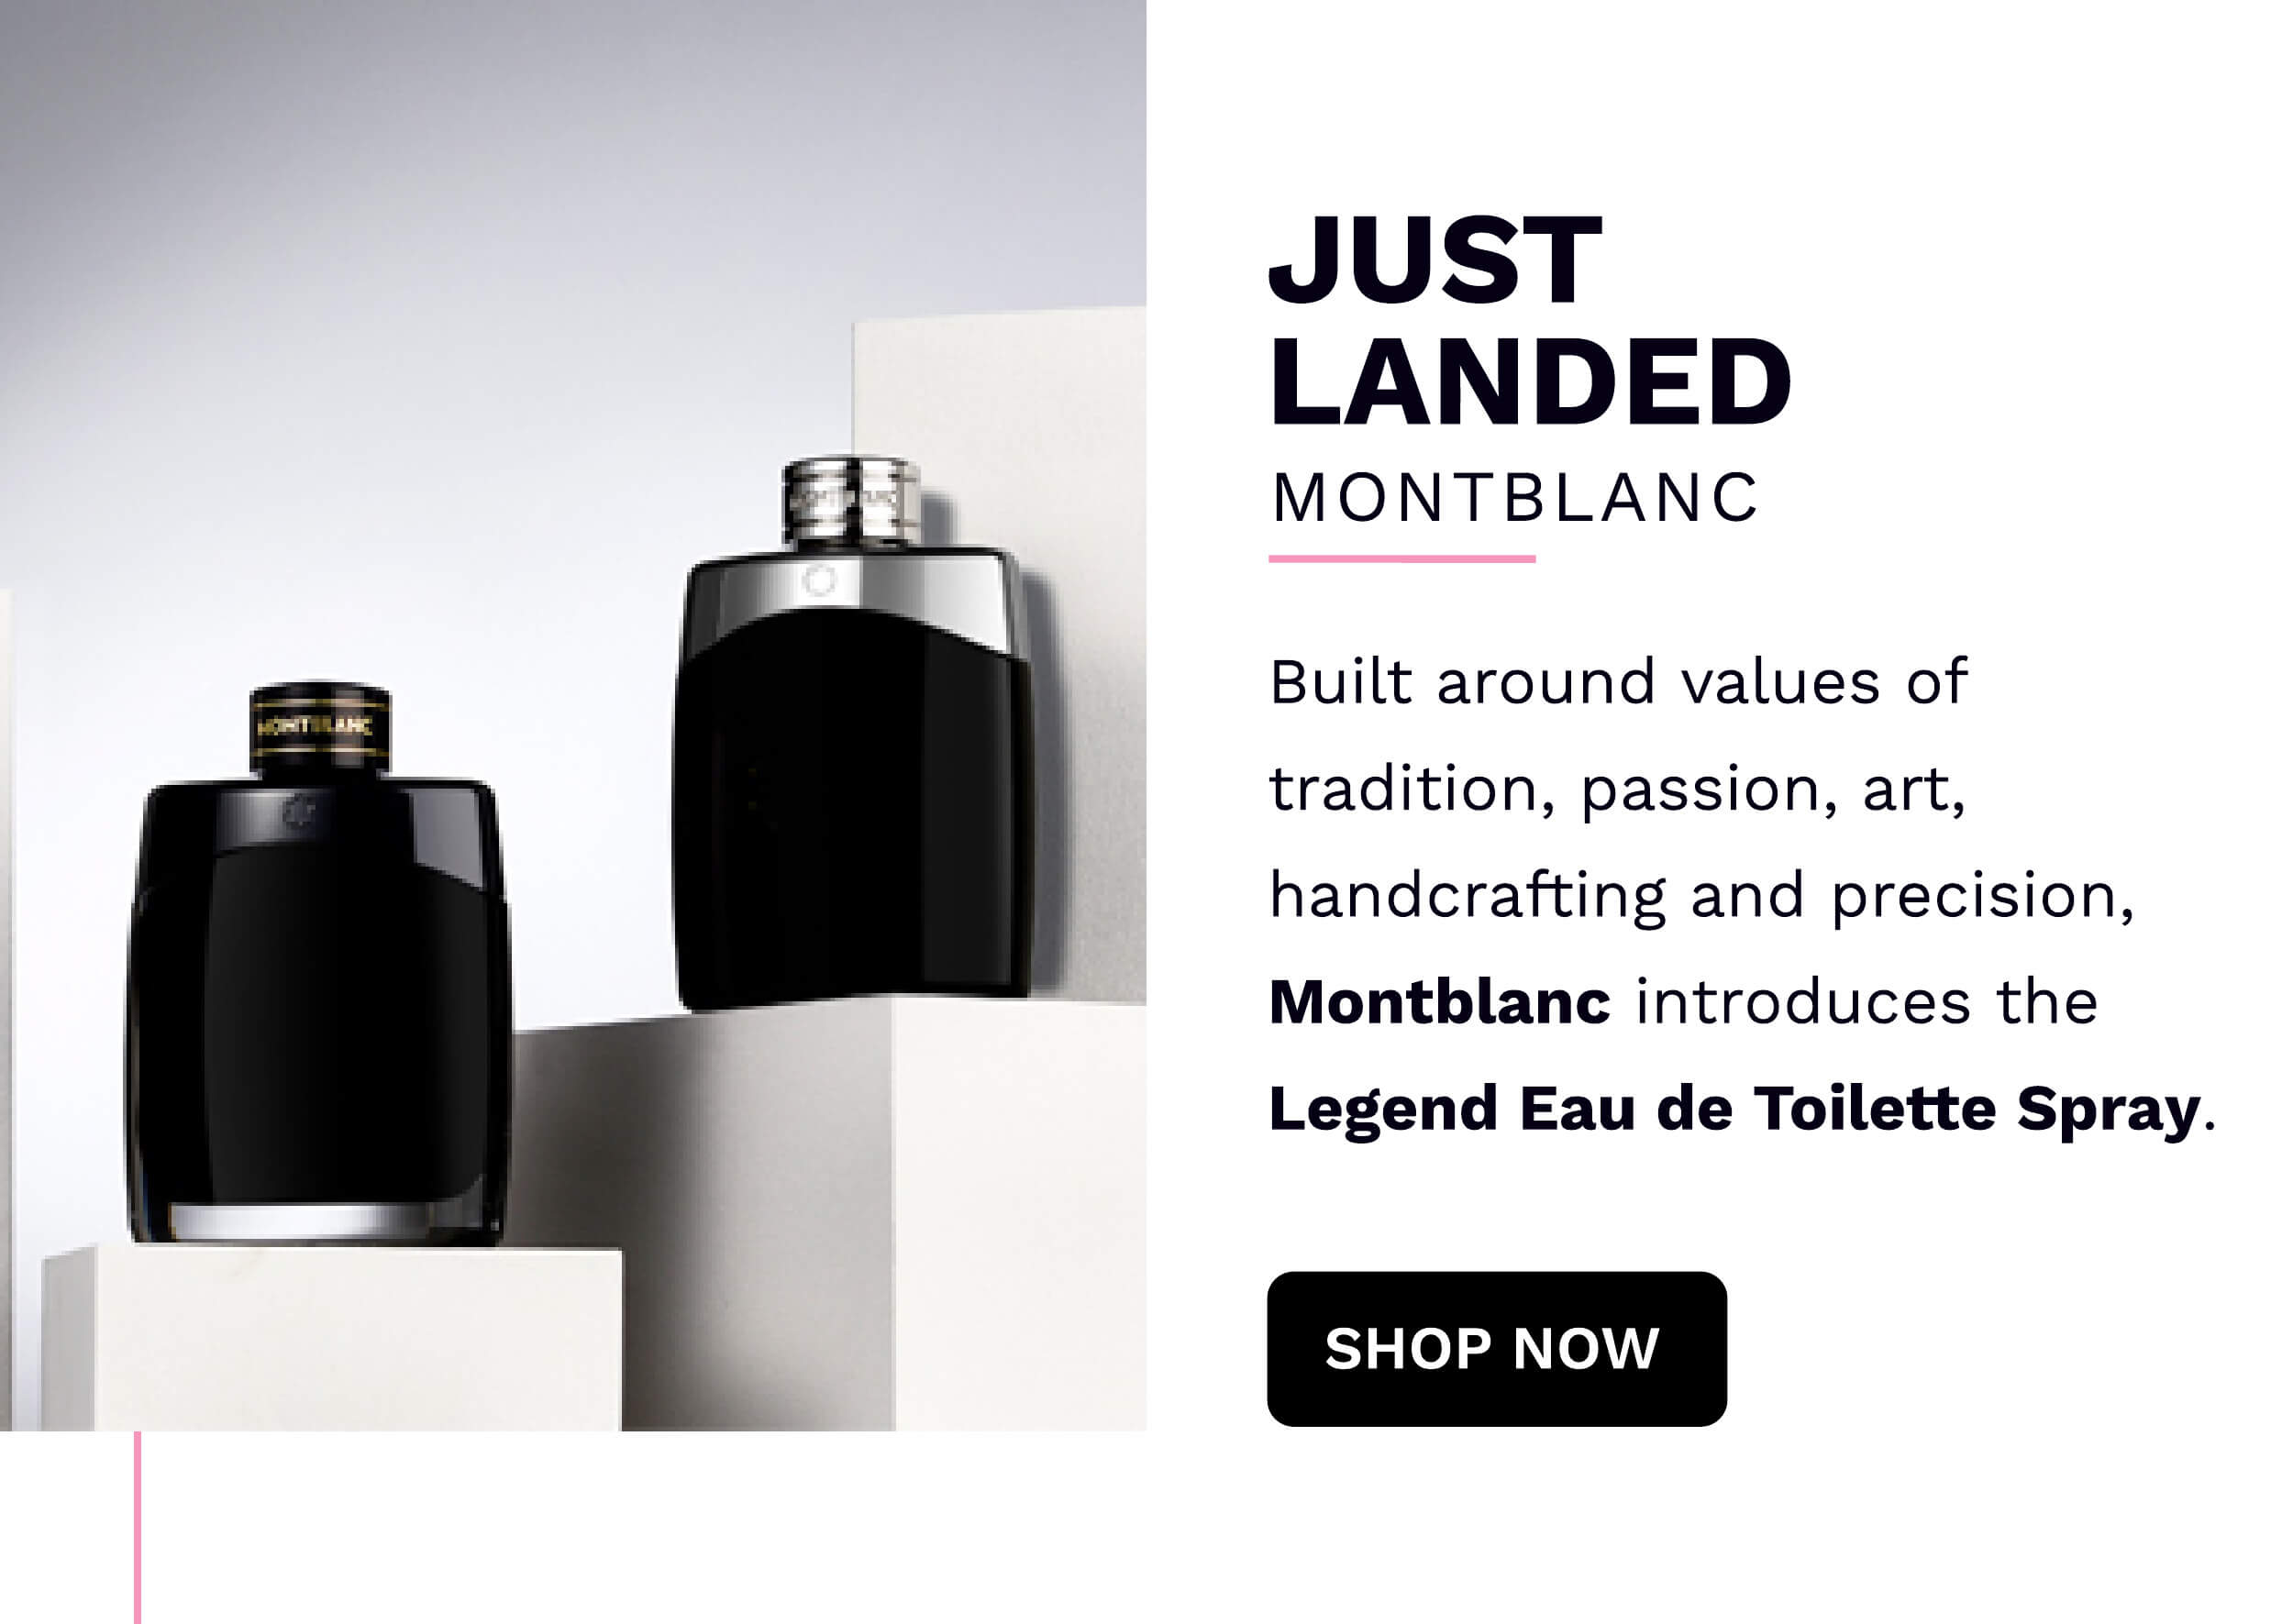 JUST LANDED MONTBLANC